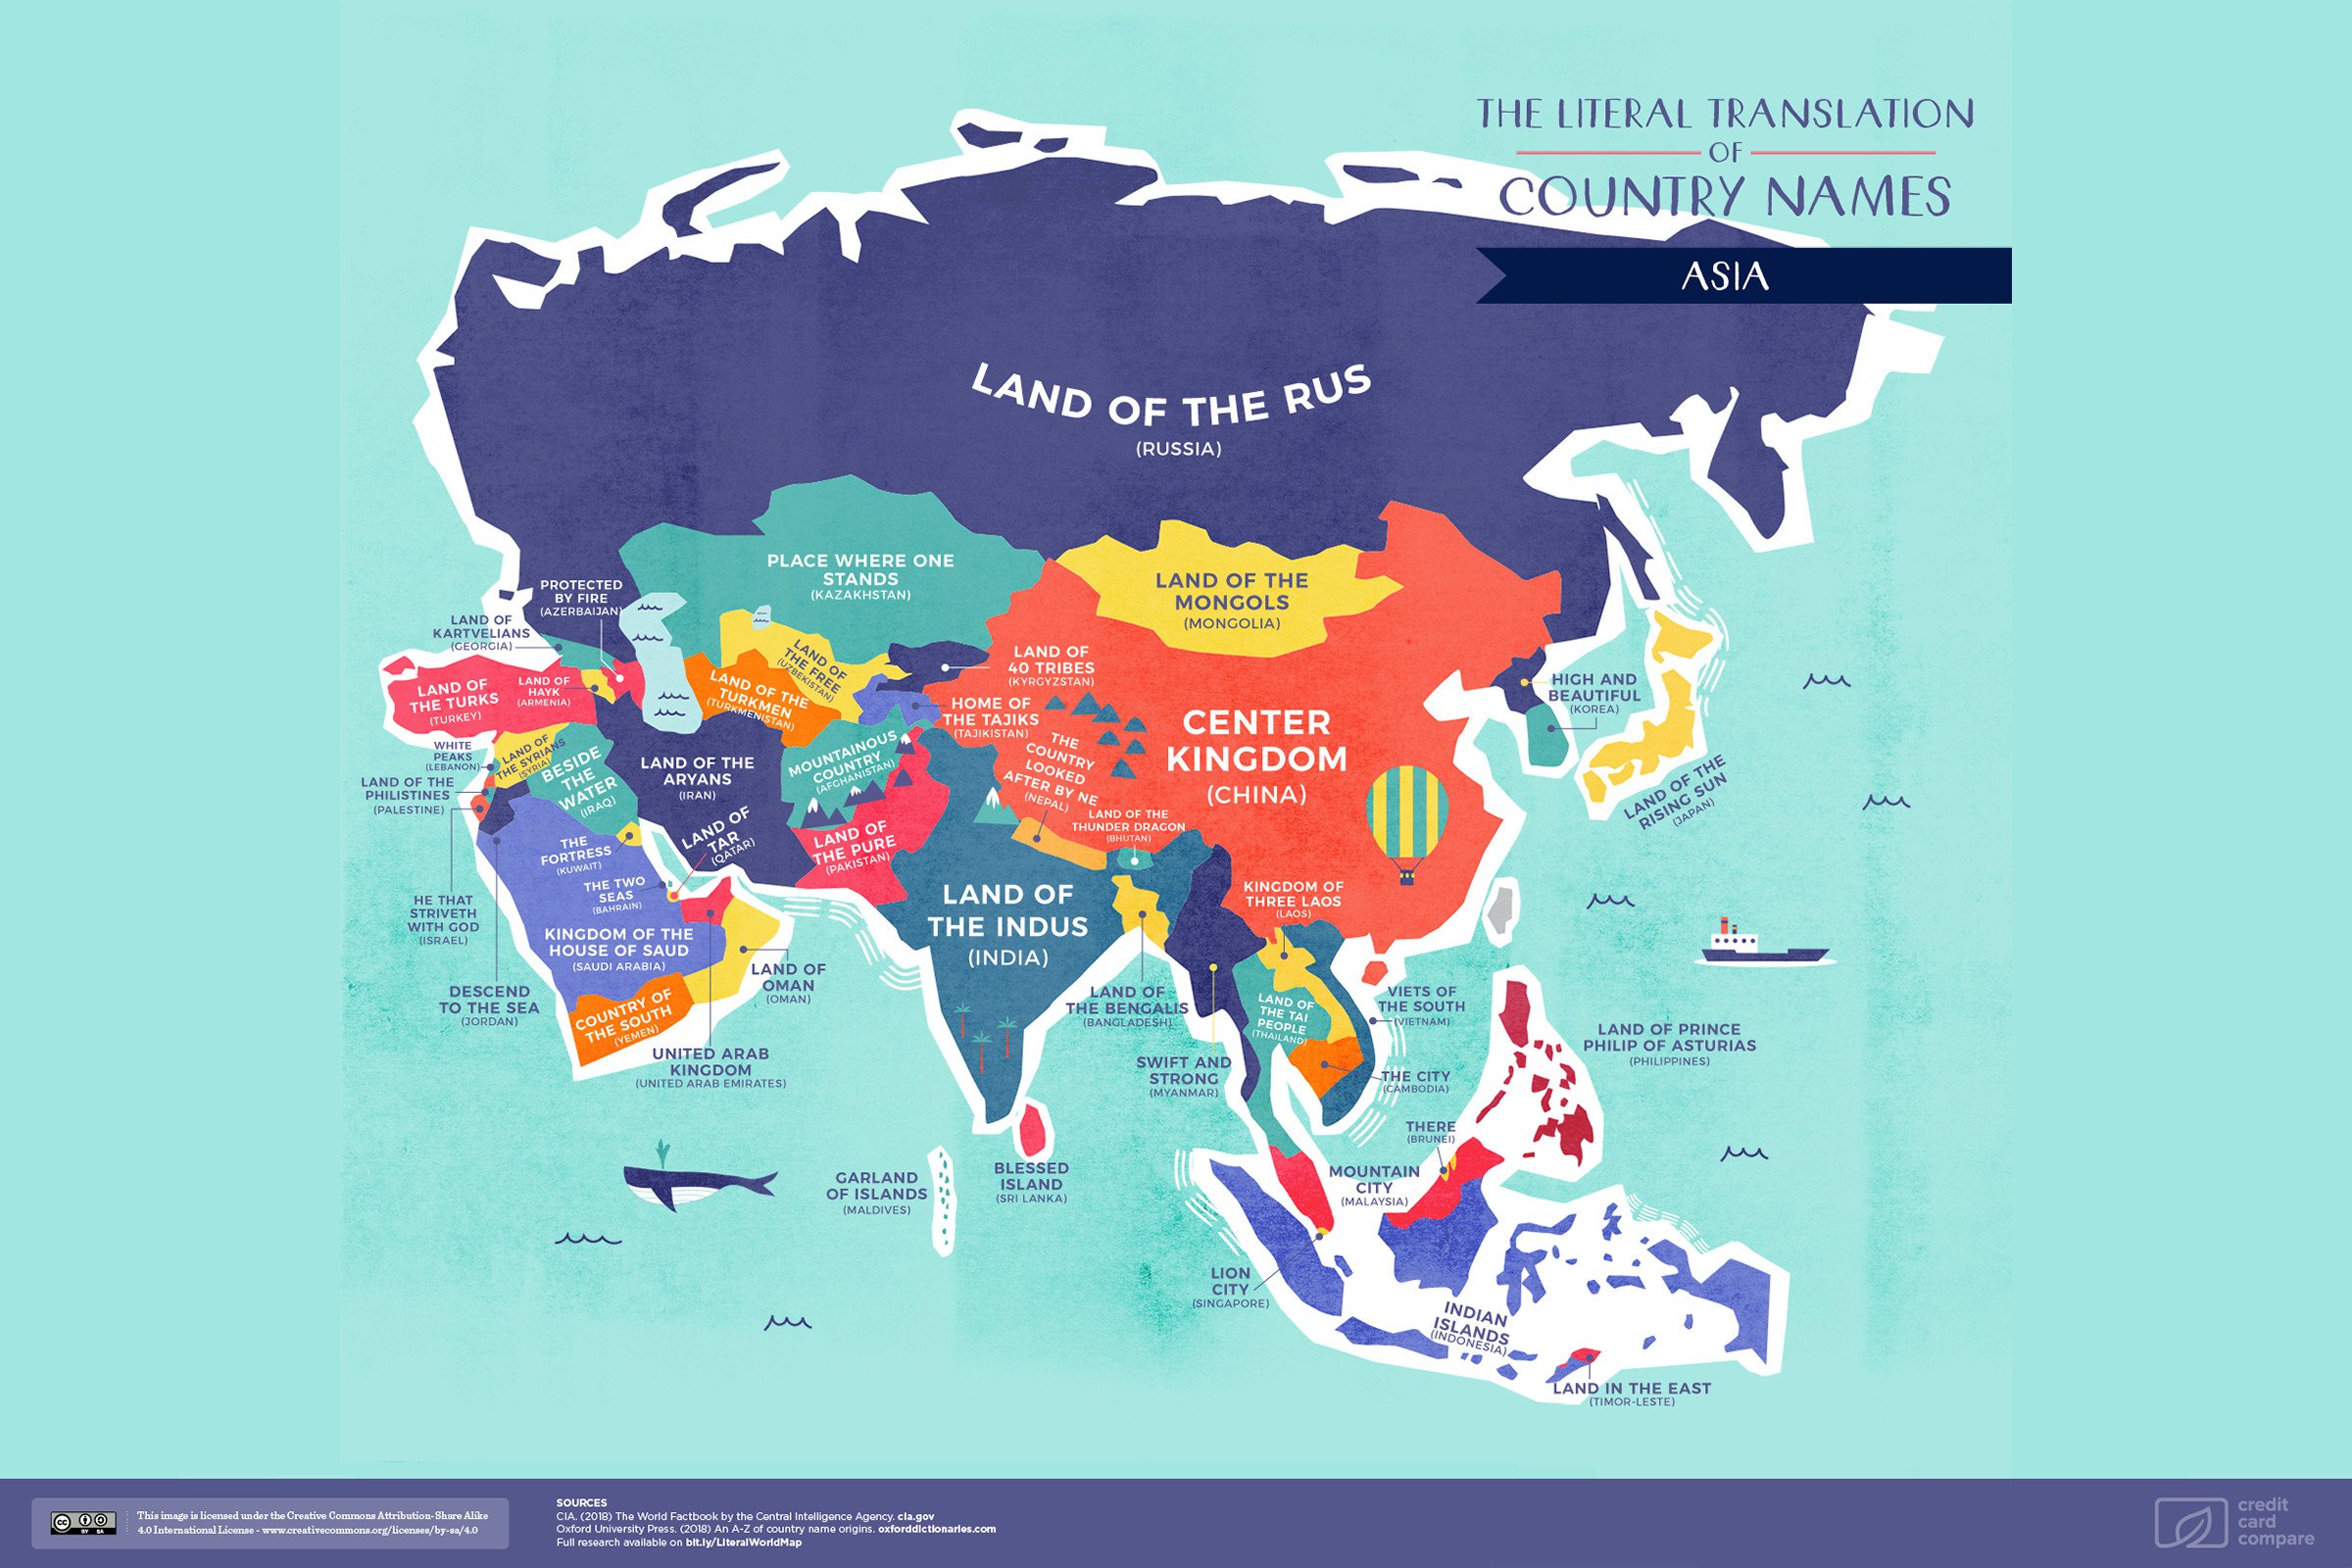 This World Map Of Literally Translated Country Names Will Amaze You